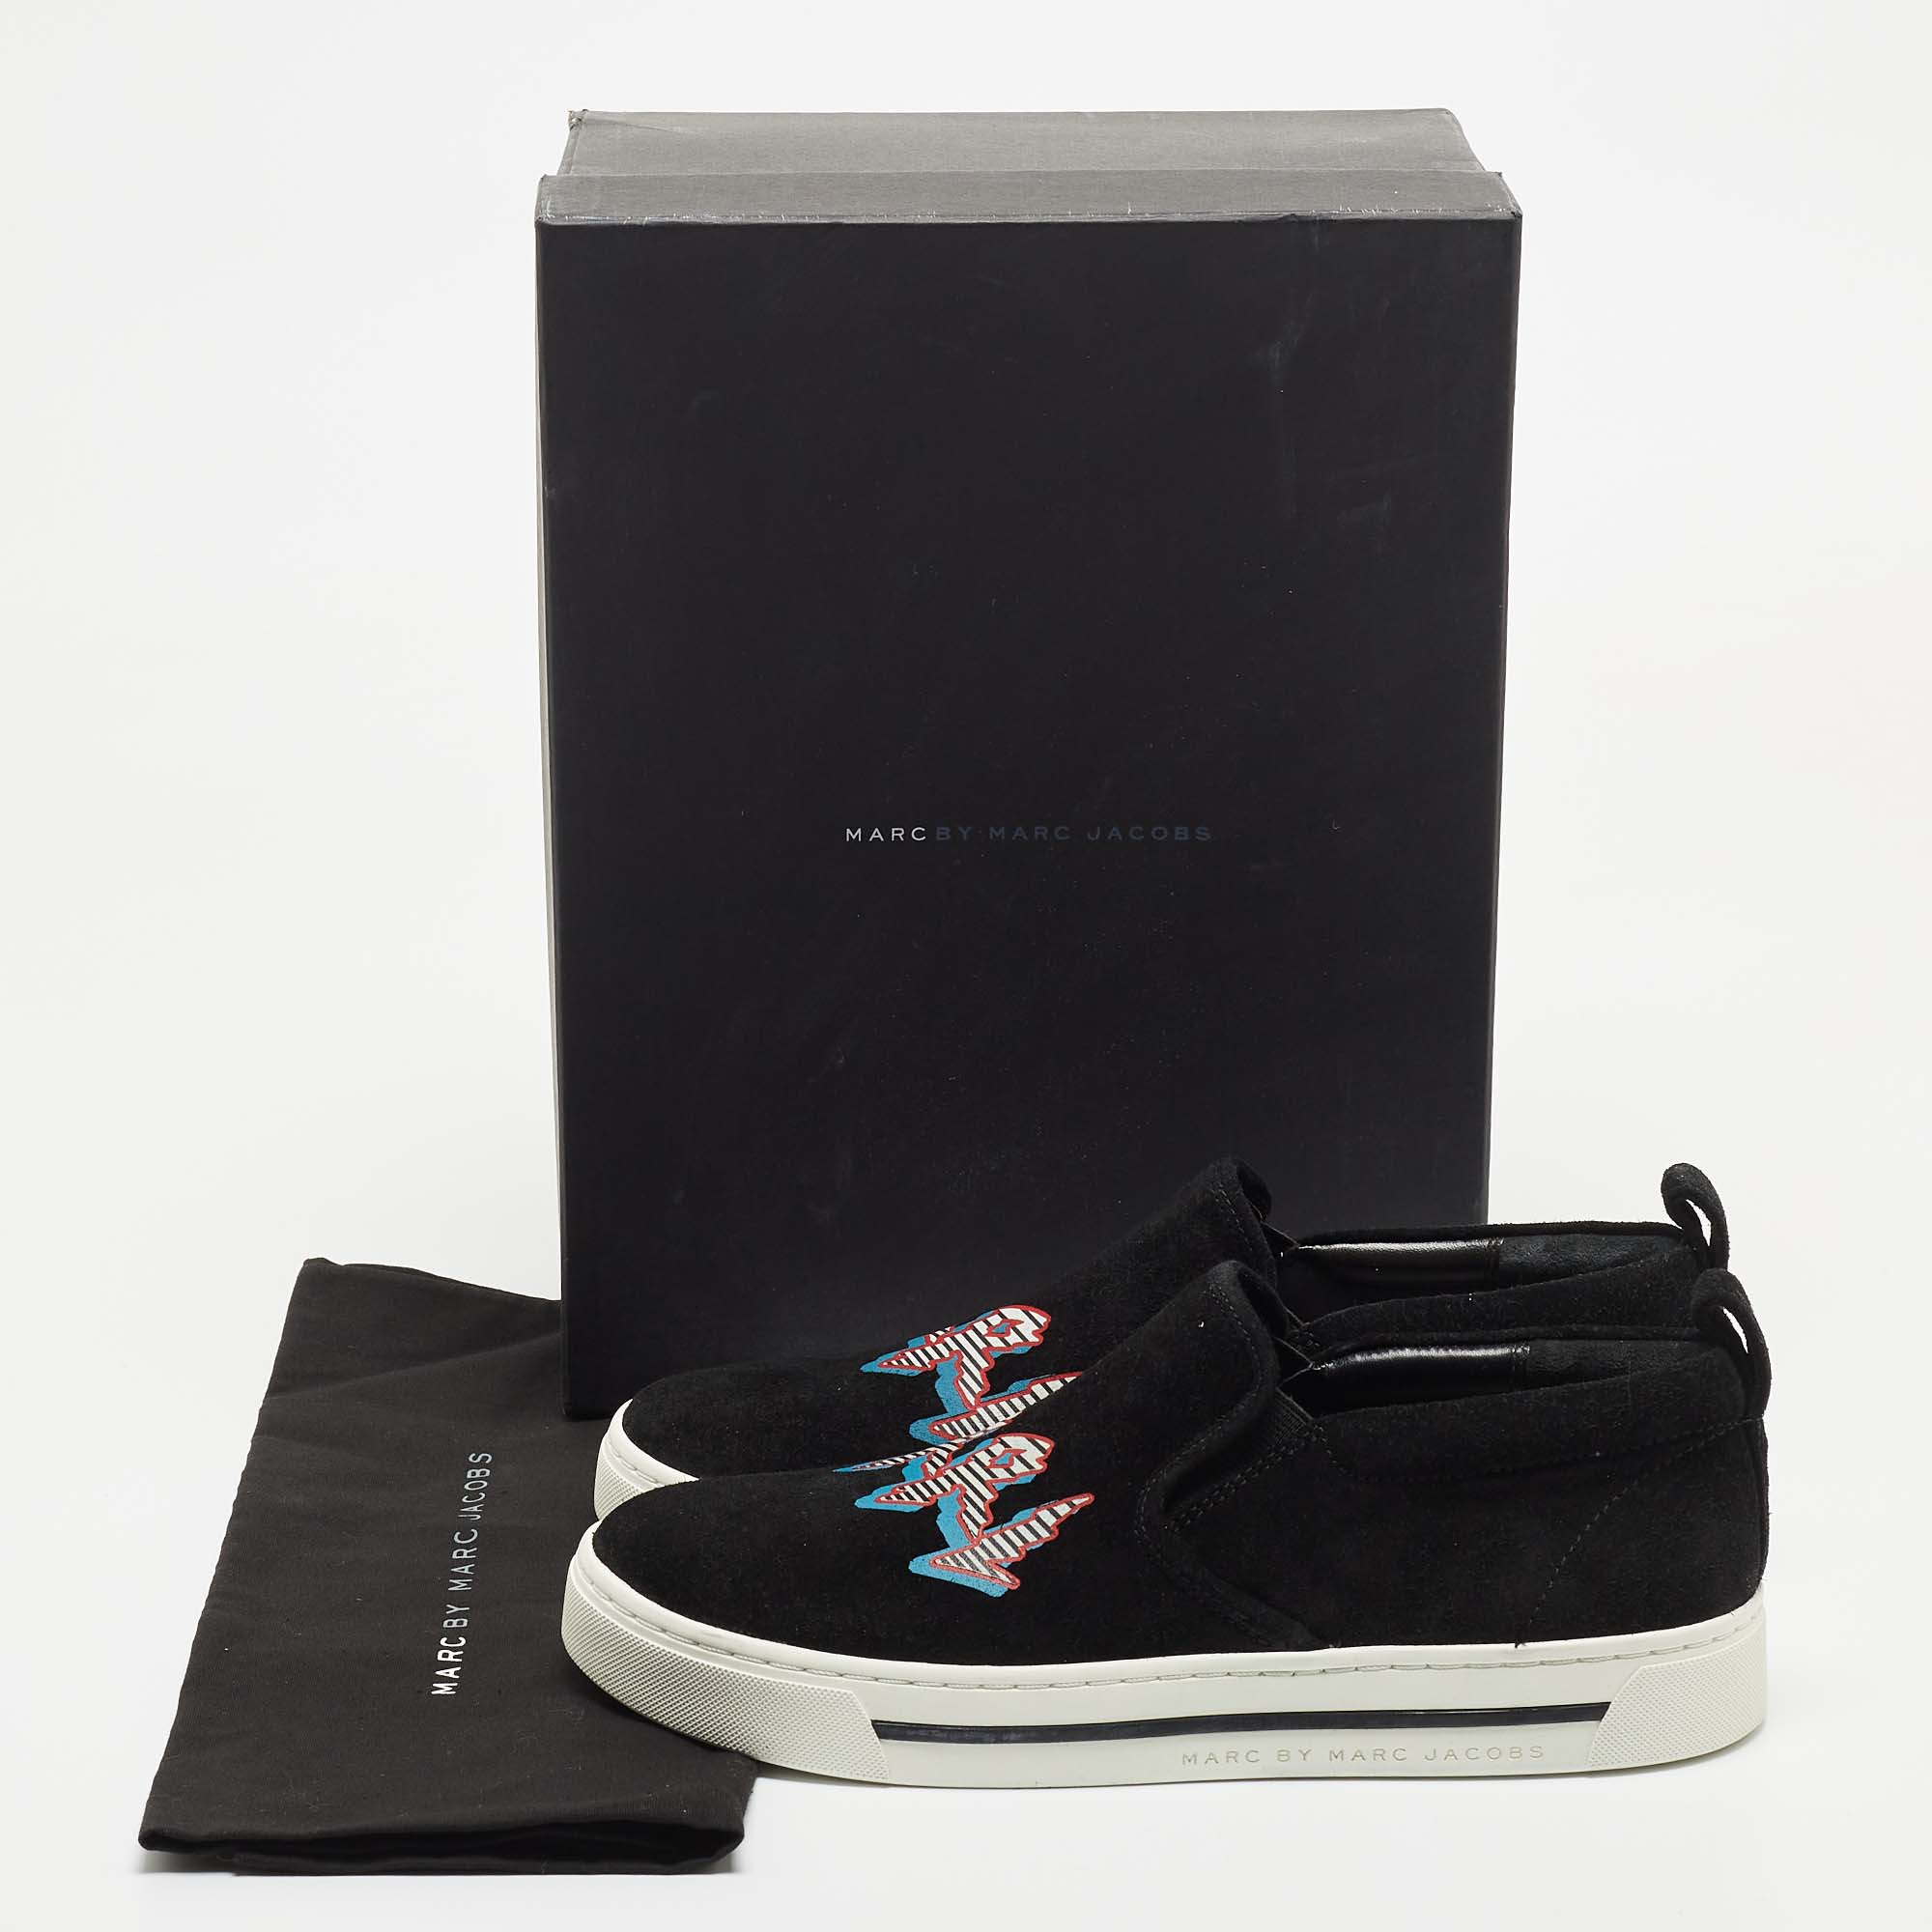 Marc By Marc Jacobs Black Suede GRRL Slip On Sneakers Size 37